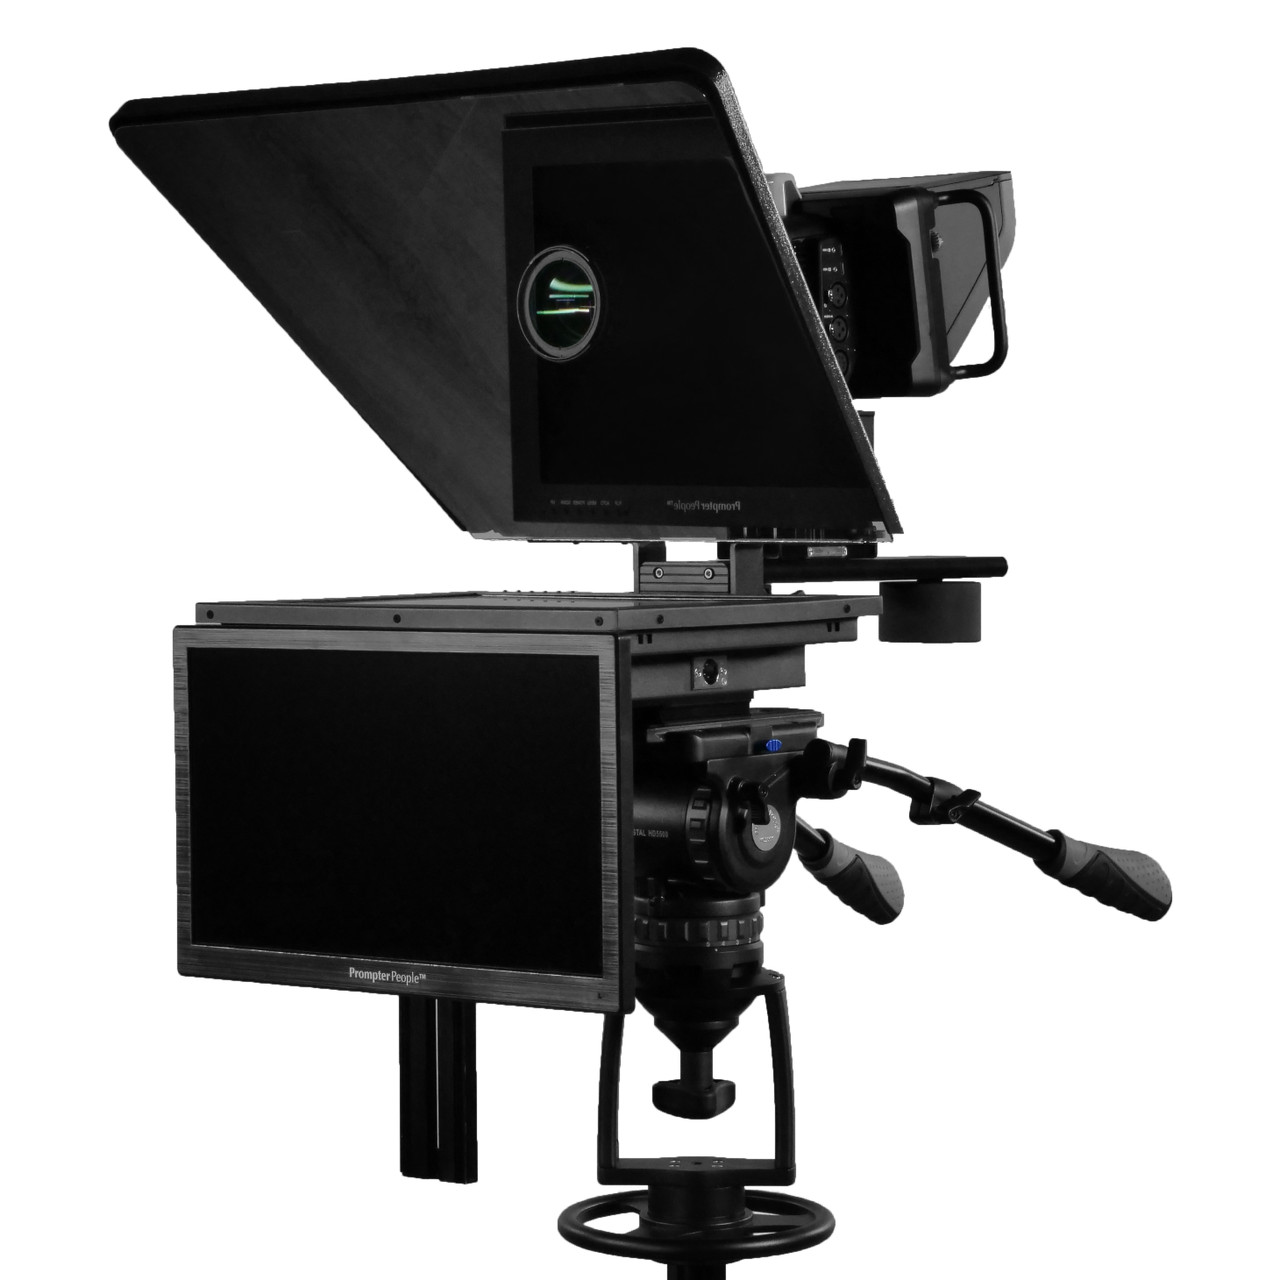 Flex Plus Talent Monitor Teleprompter | 15" 400 NIT Regular Prompting Monitor HDMI | VGA with 15.6" Color Accurate RGB IPS 3G-SDI Talent Monitor